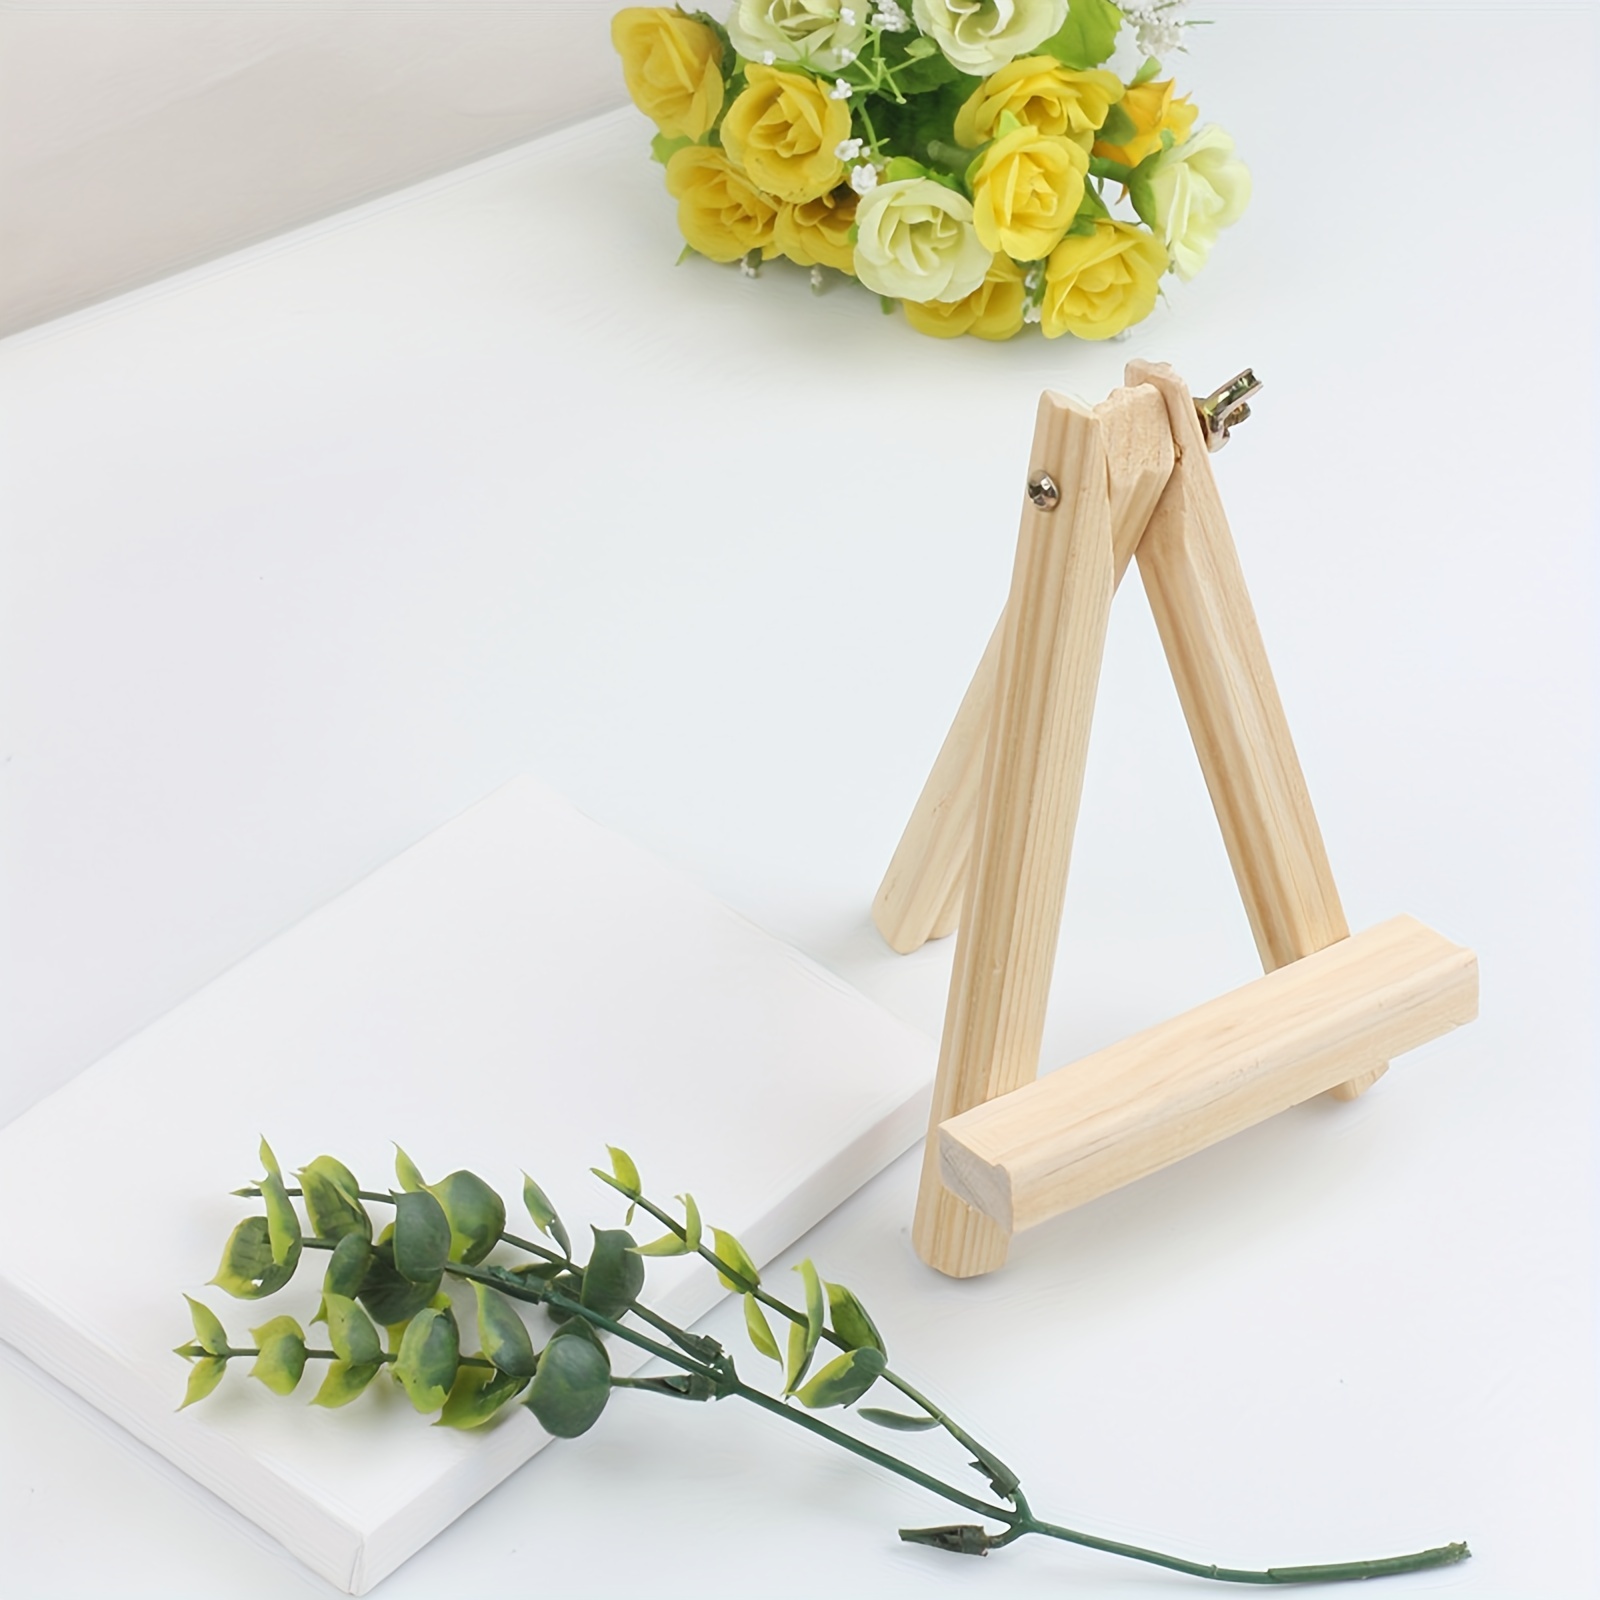 2 Sets Artist Canvas Panels Stretched Easel Photo Picture Holder Stand Wood